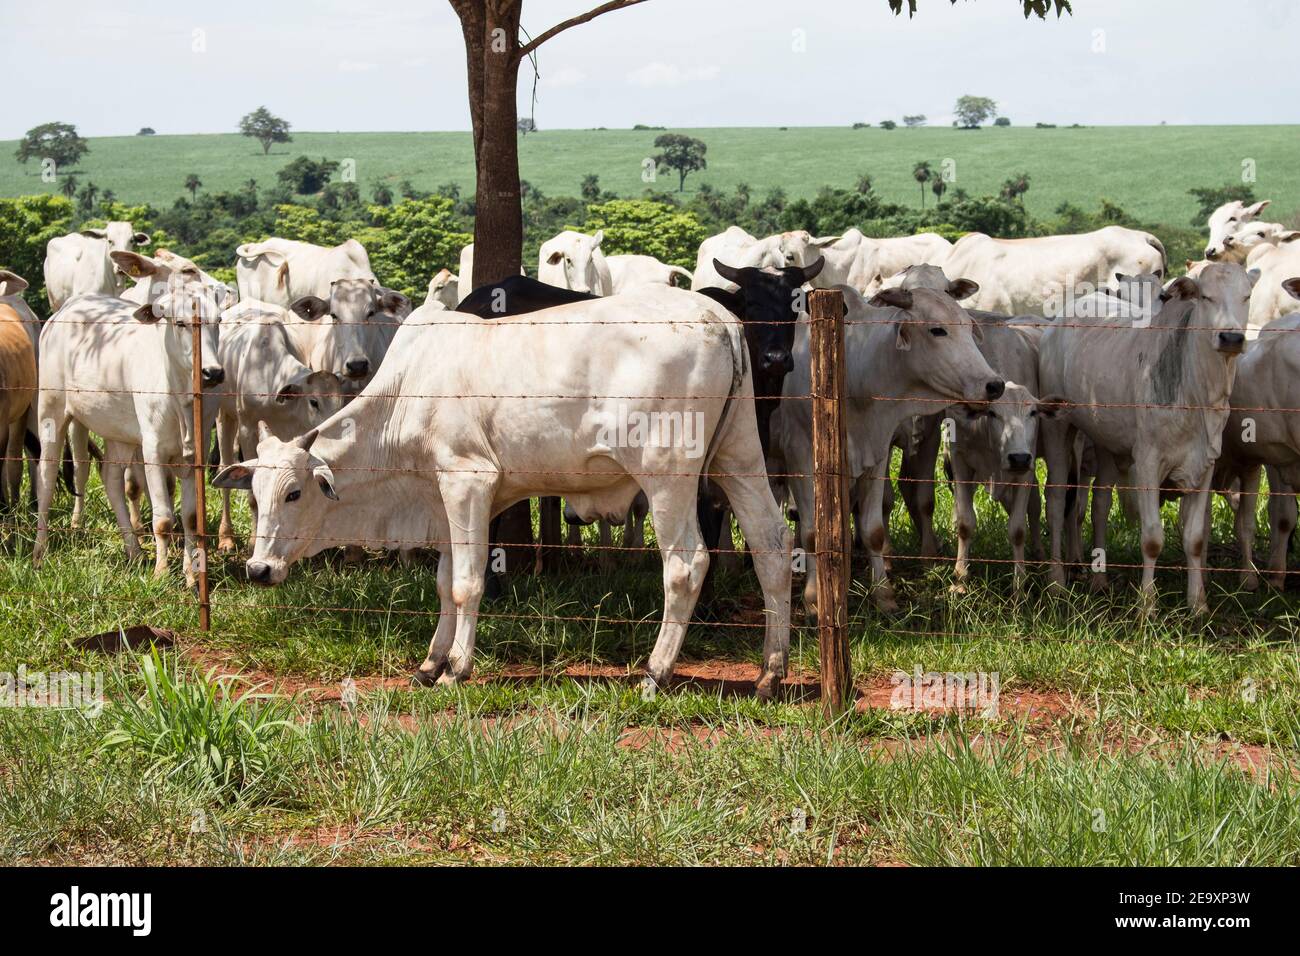 Herd of white cows and black cattle grazing and looking around attentively Stock Photo